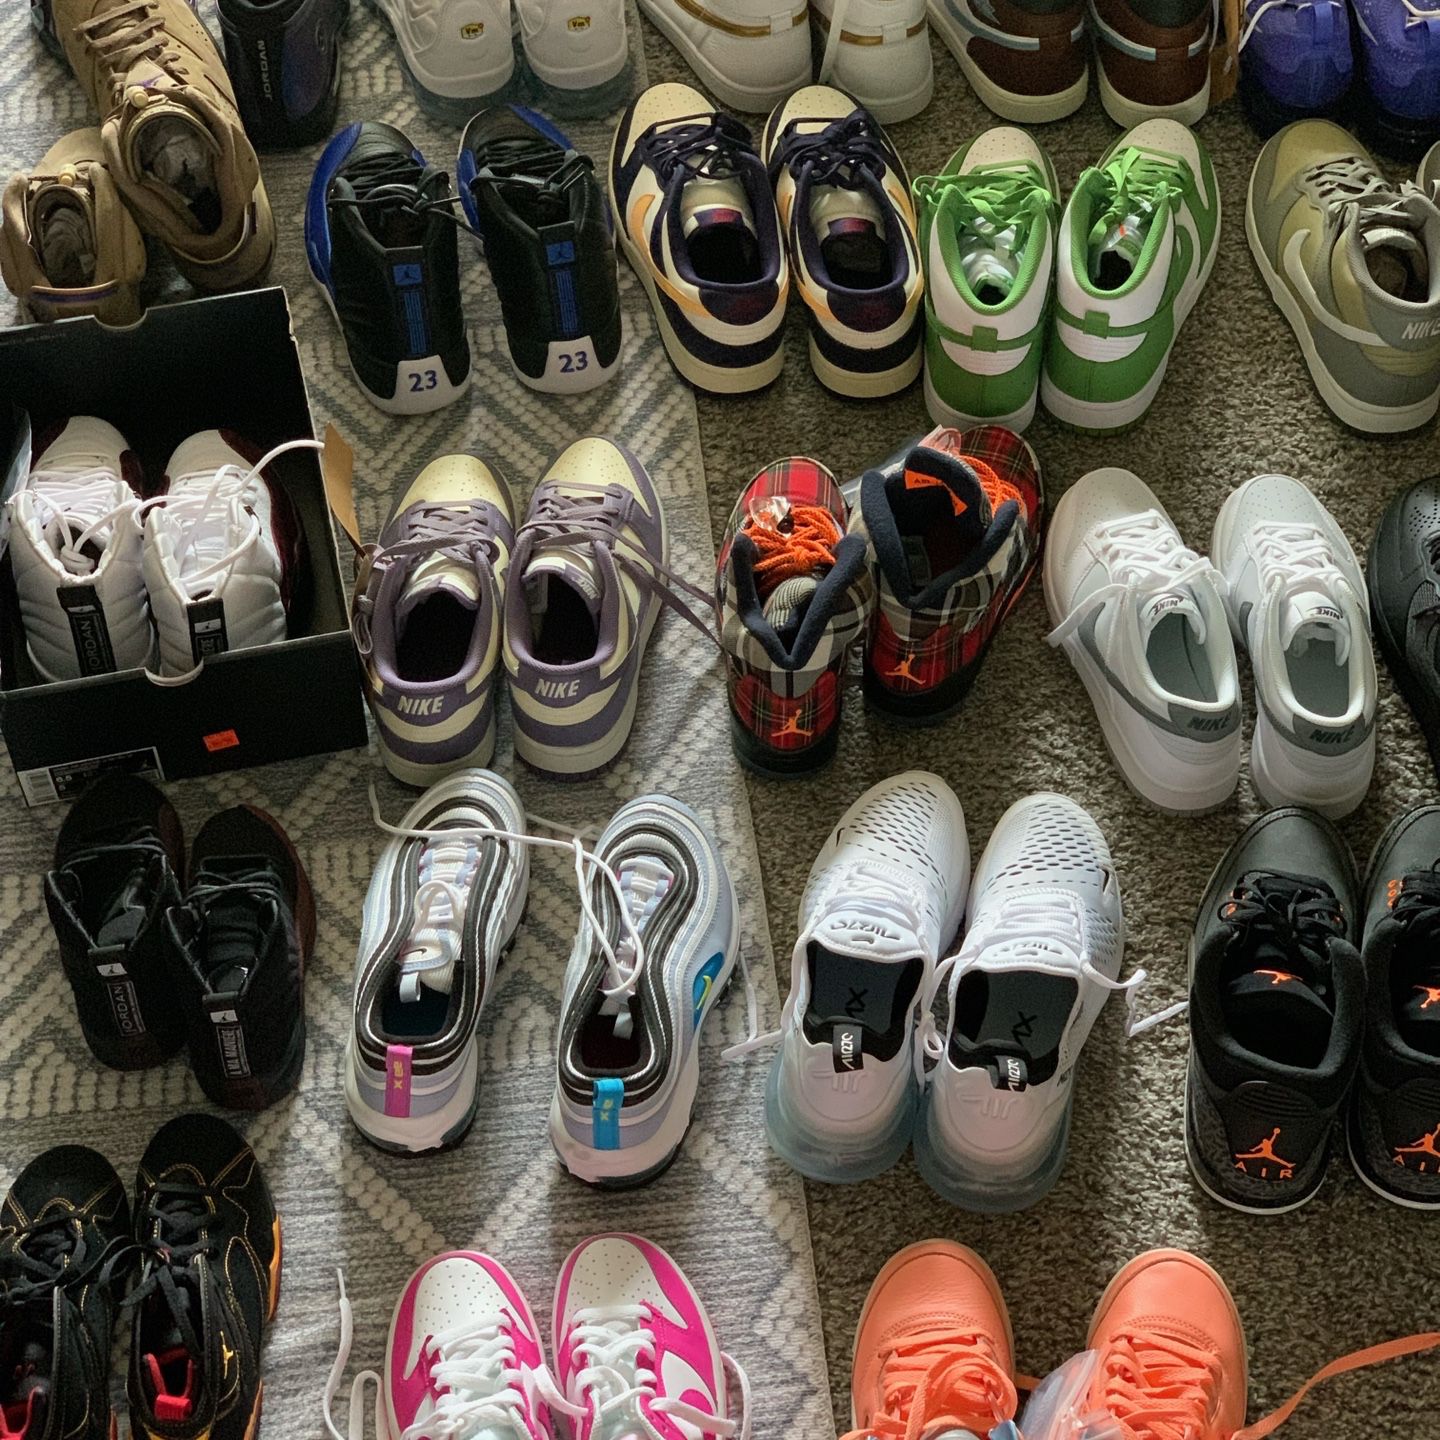  34 Pair Of Shoes From size 13c To 11  Men's And Women's 